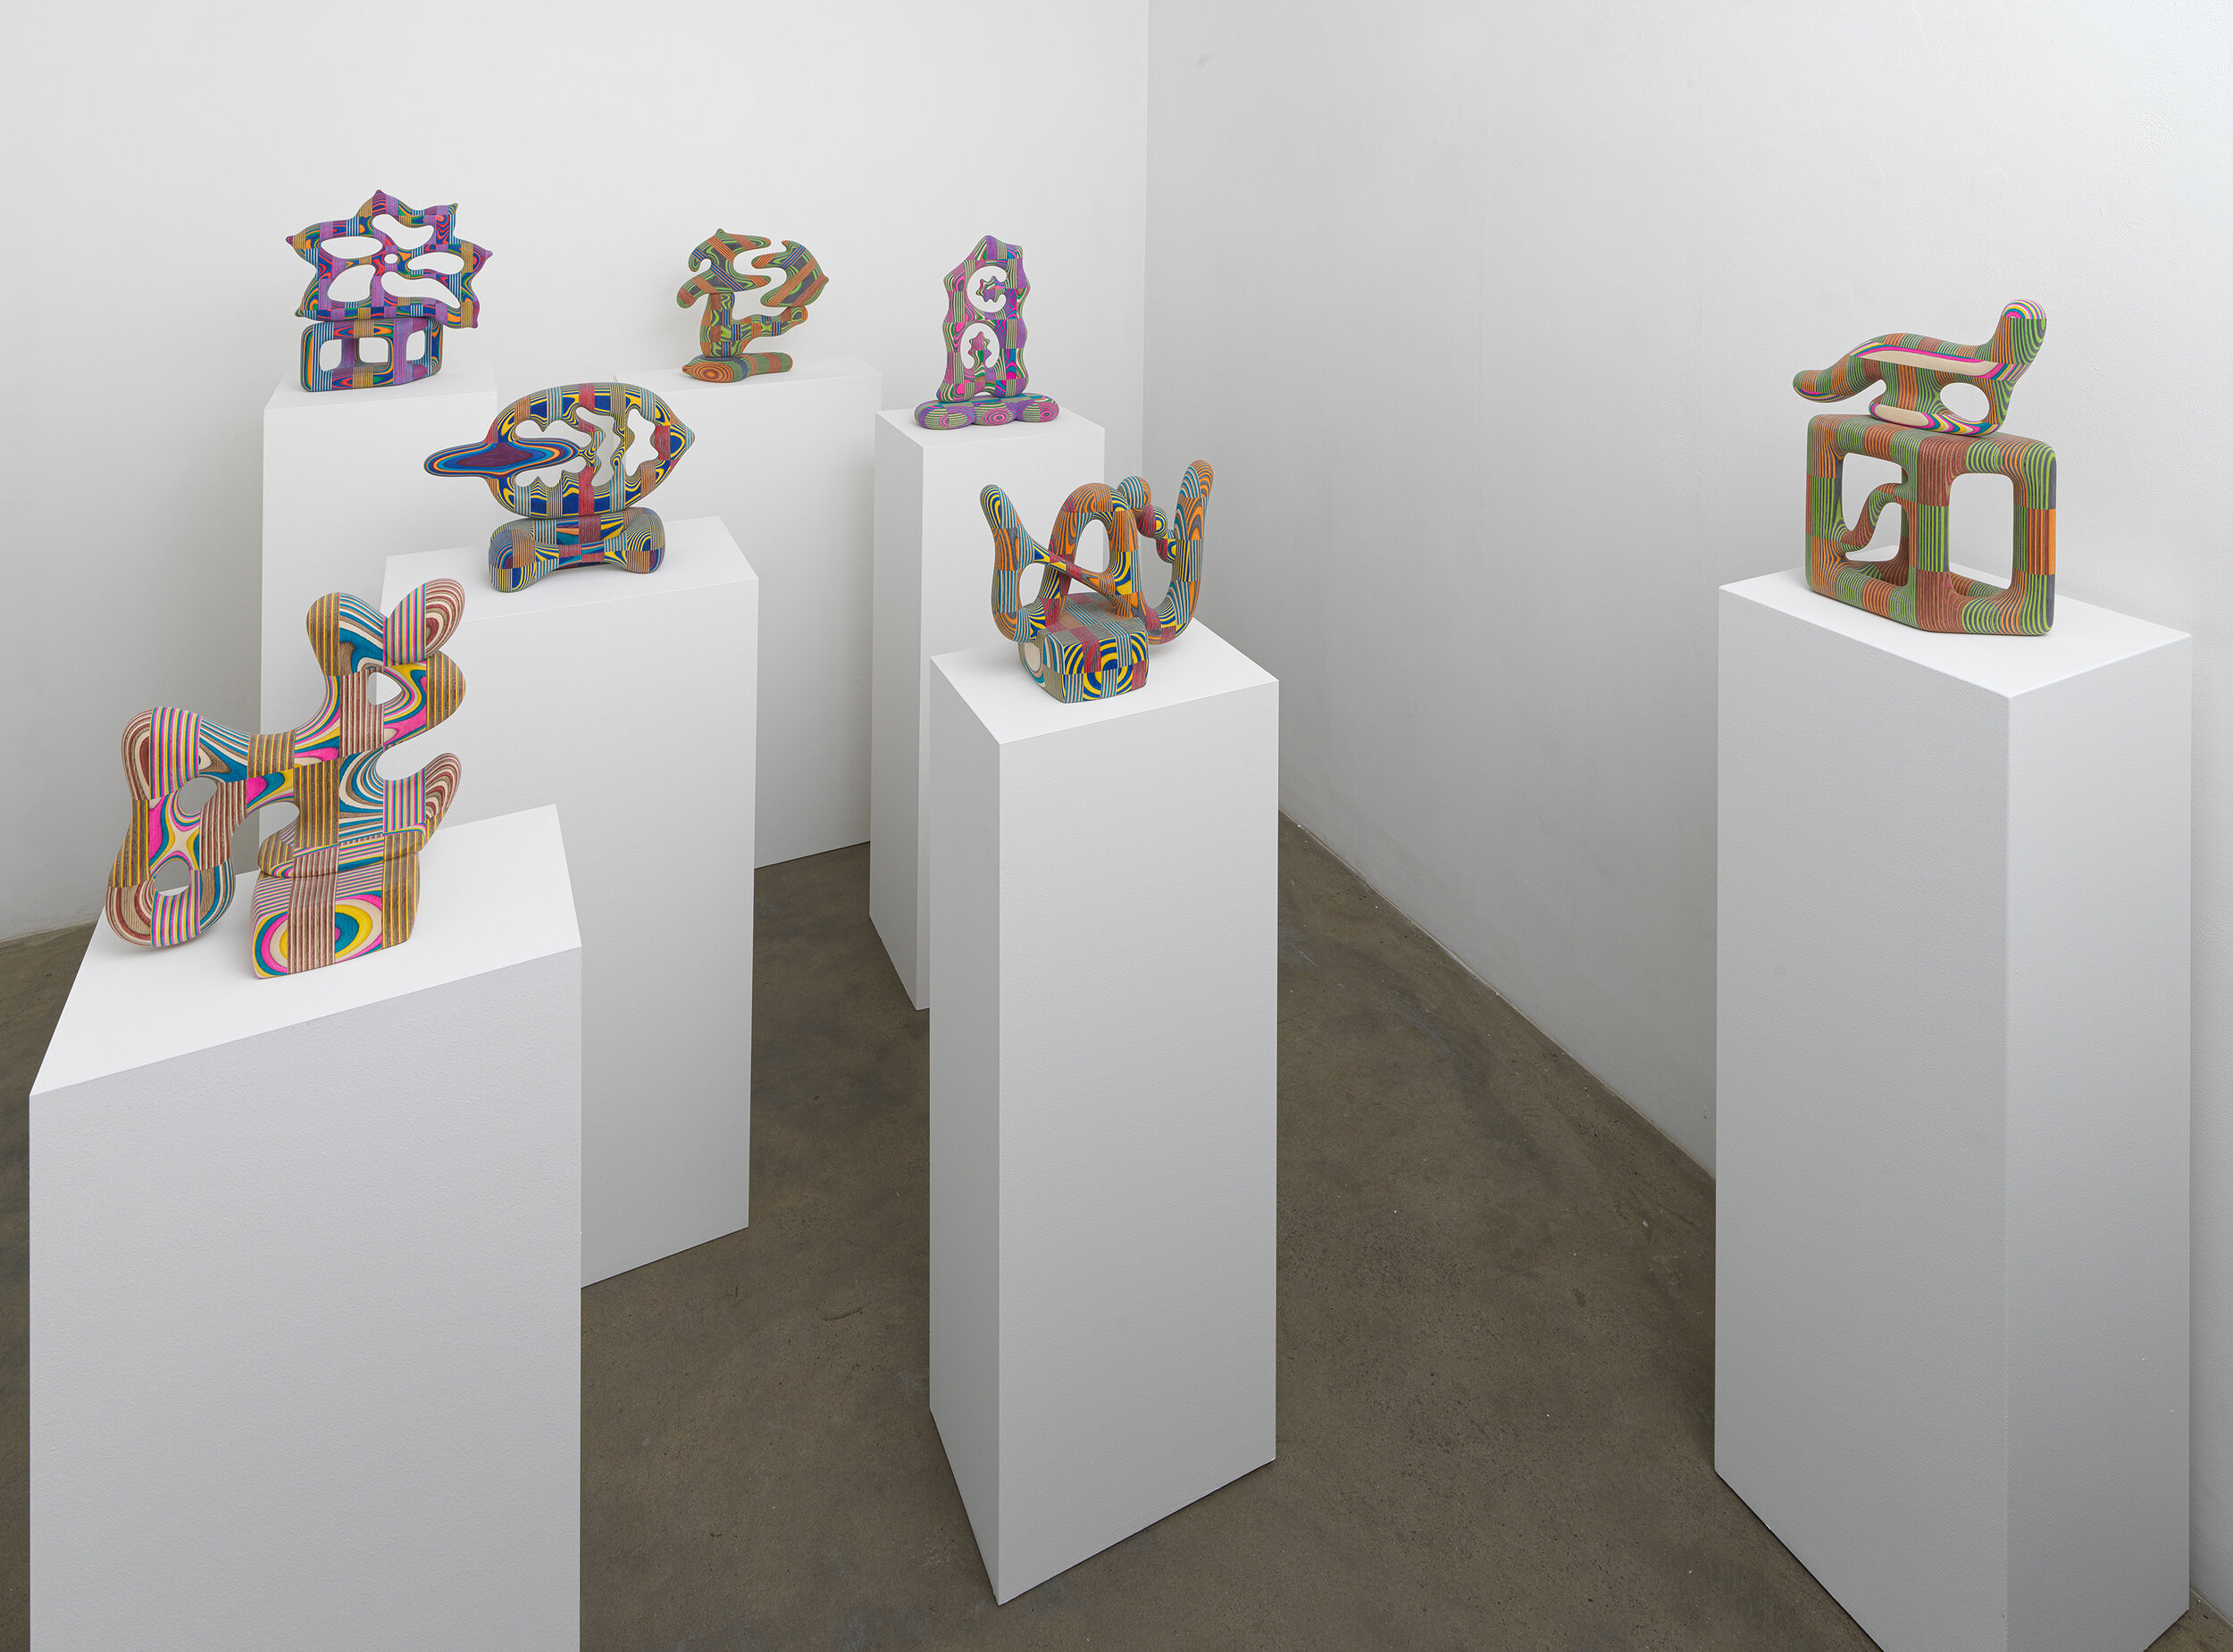 Bayne Peterson, Installation image of sculptures